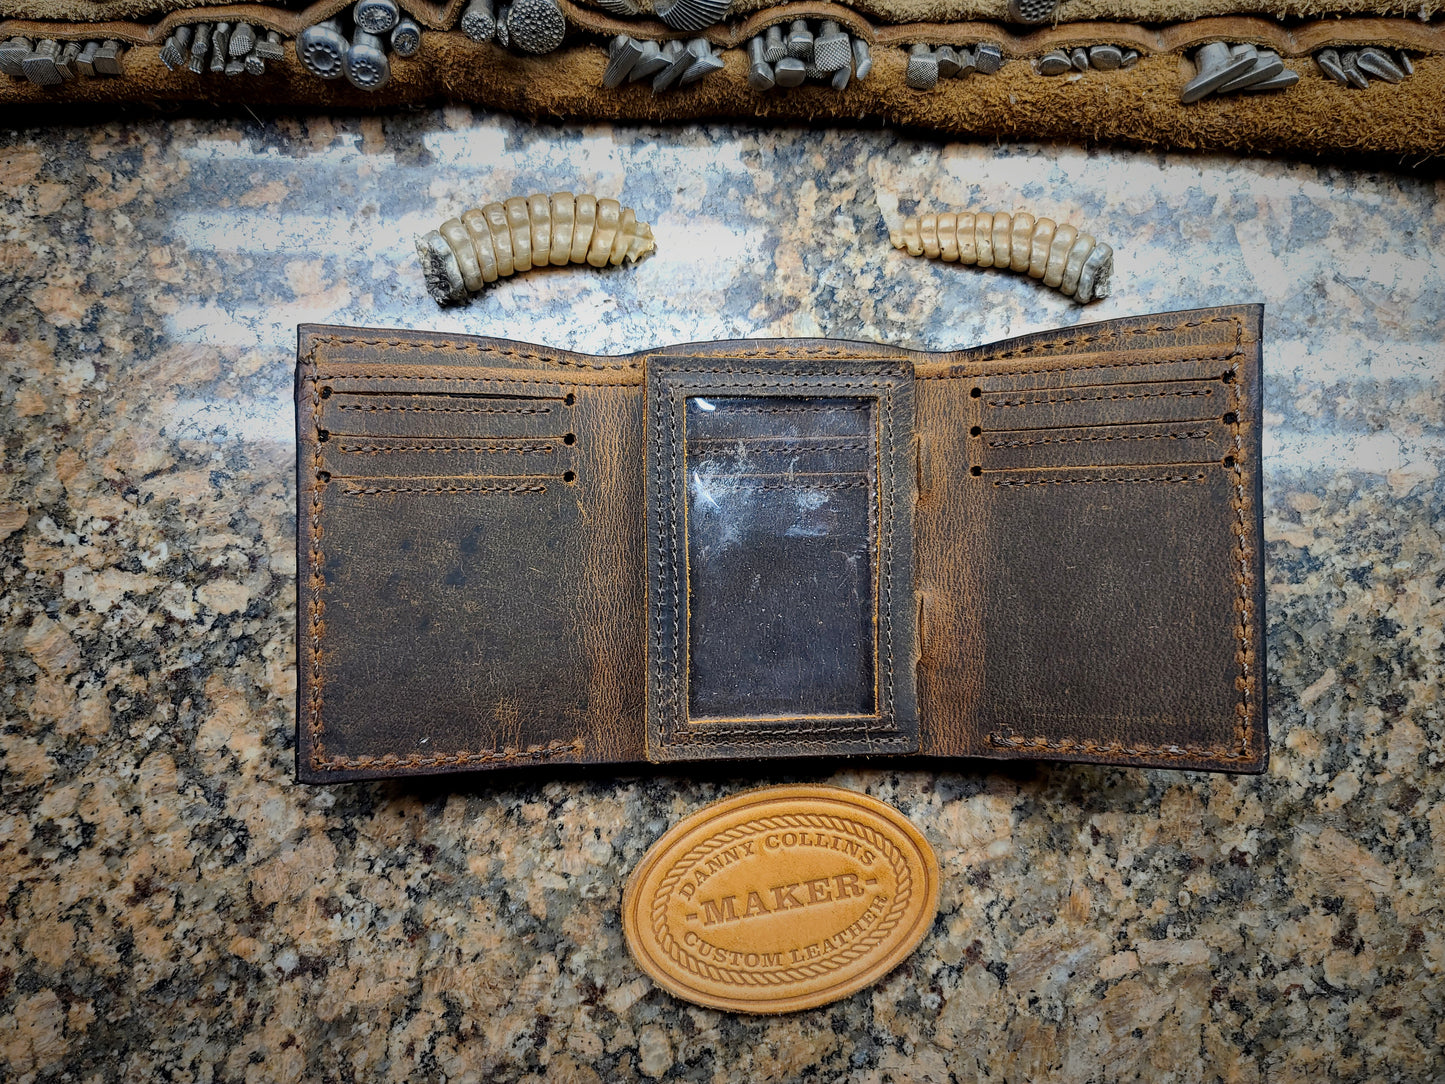 Tri fold wallet with Rattlesnake Inlay, Leather Wallet, Men's Wallet